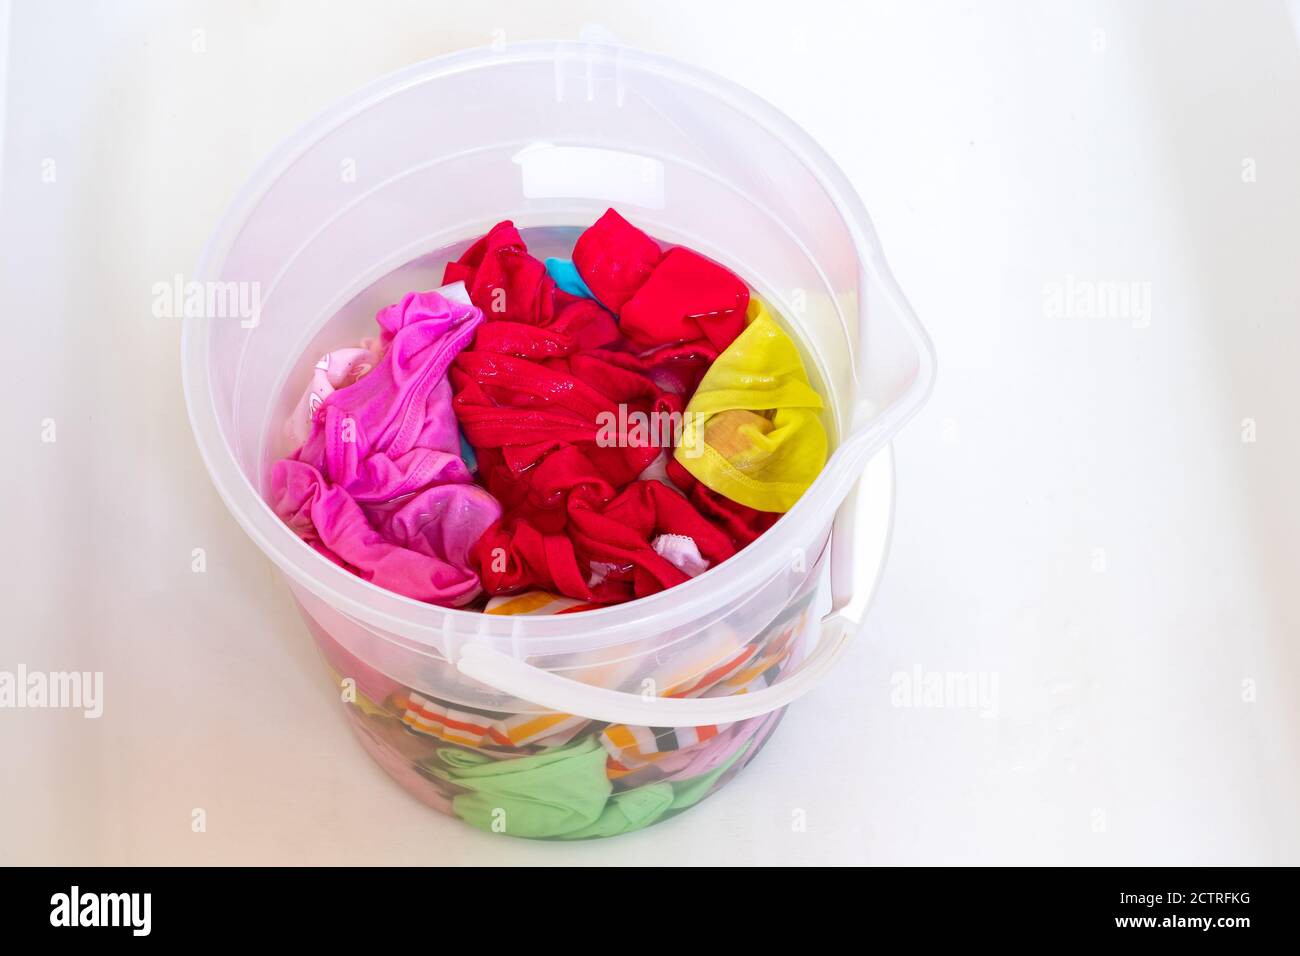 https://c8.alamy.com/comp/2CTRFKG/colorful-laundry-in-a-transparent-bucket-ready-for-washing-2CTRFKG.jpg